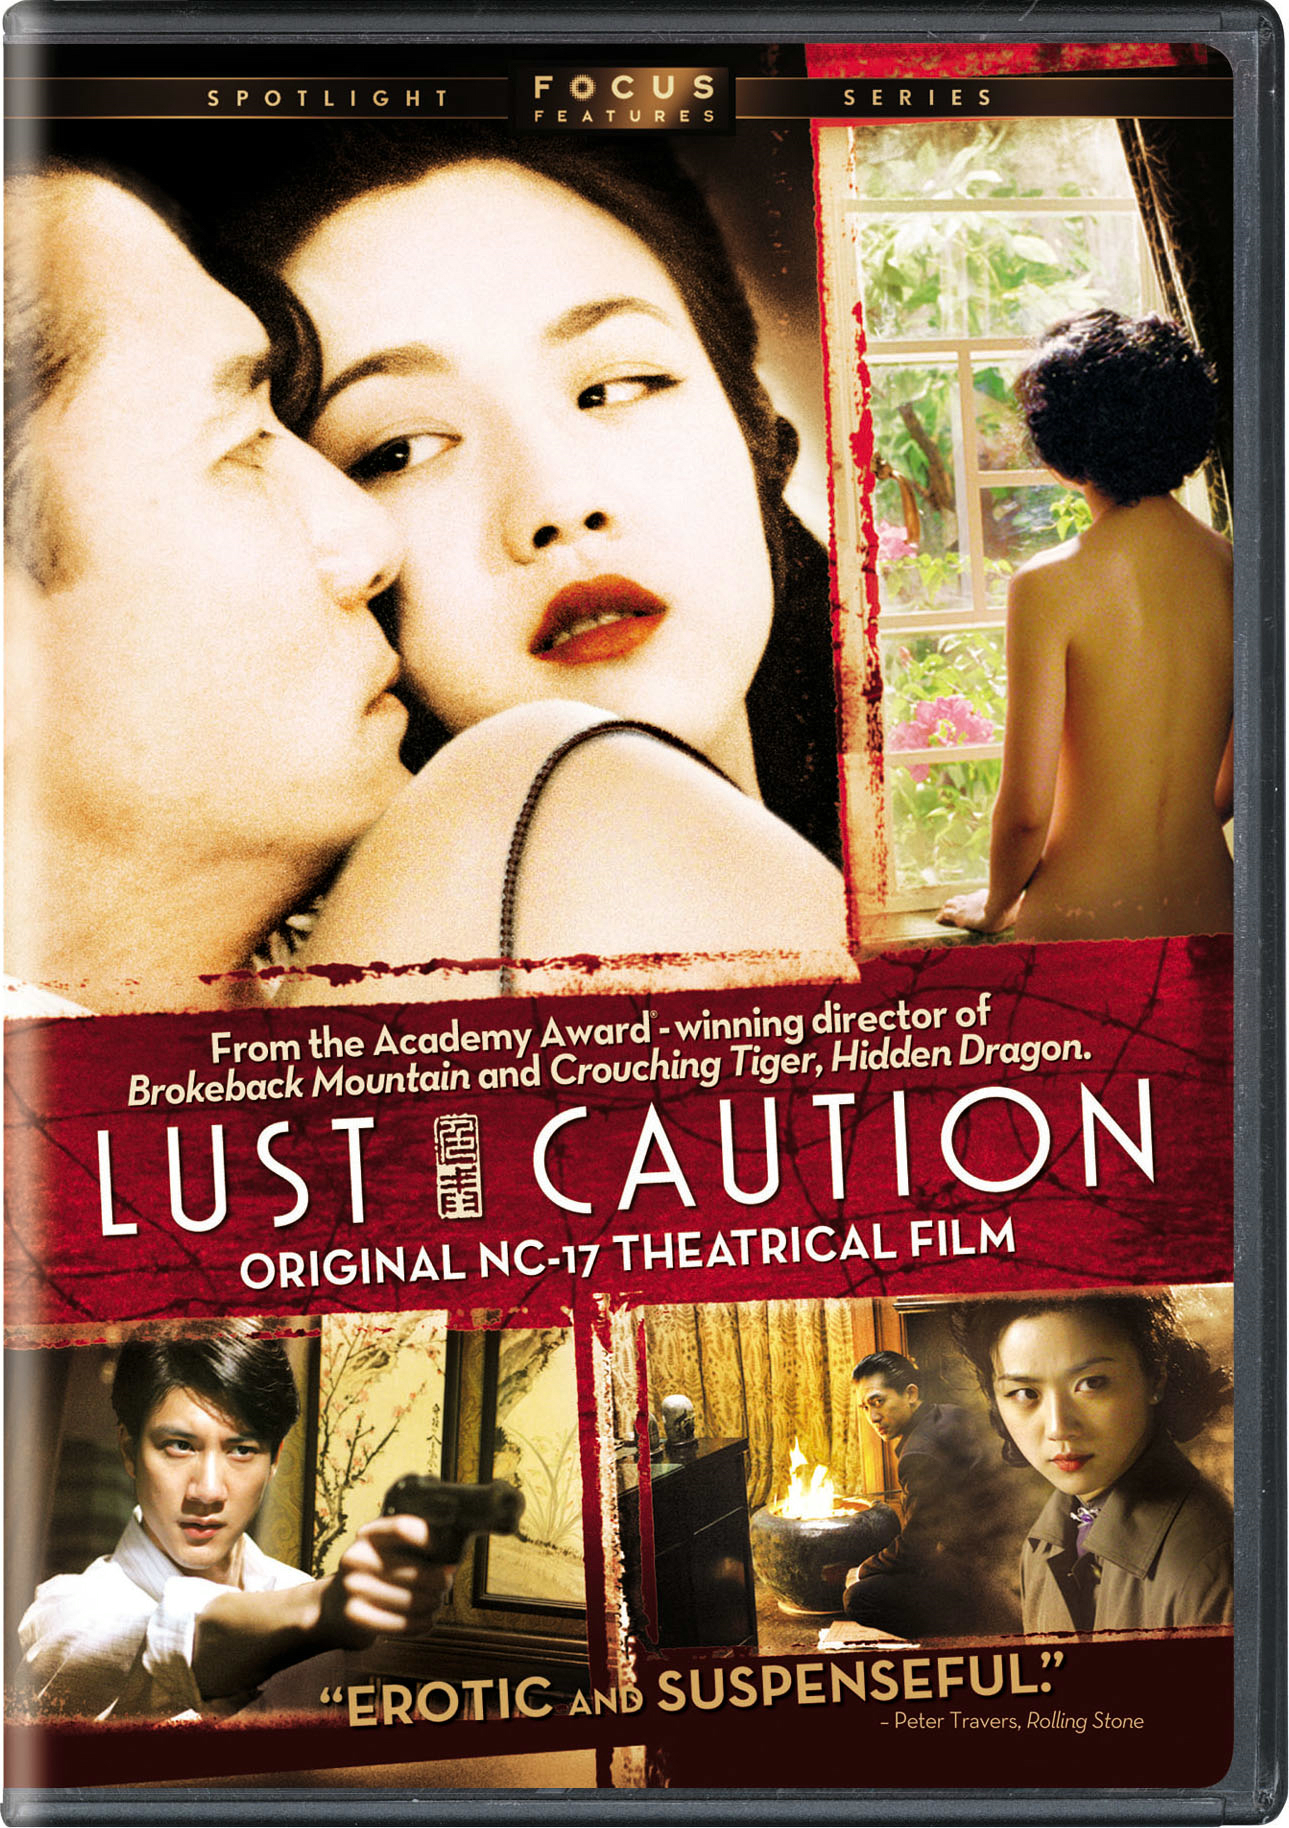 Lust, Caution (Widescreen) - DVD [ 2007 ]  - Foreign Movies On DVD - Movies On GRUV